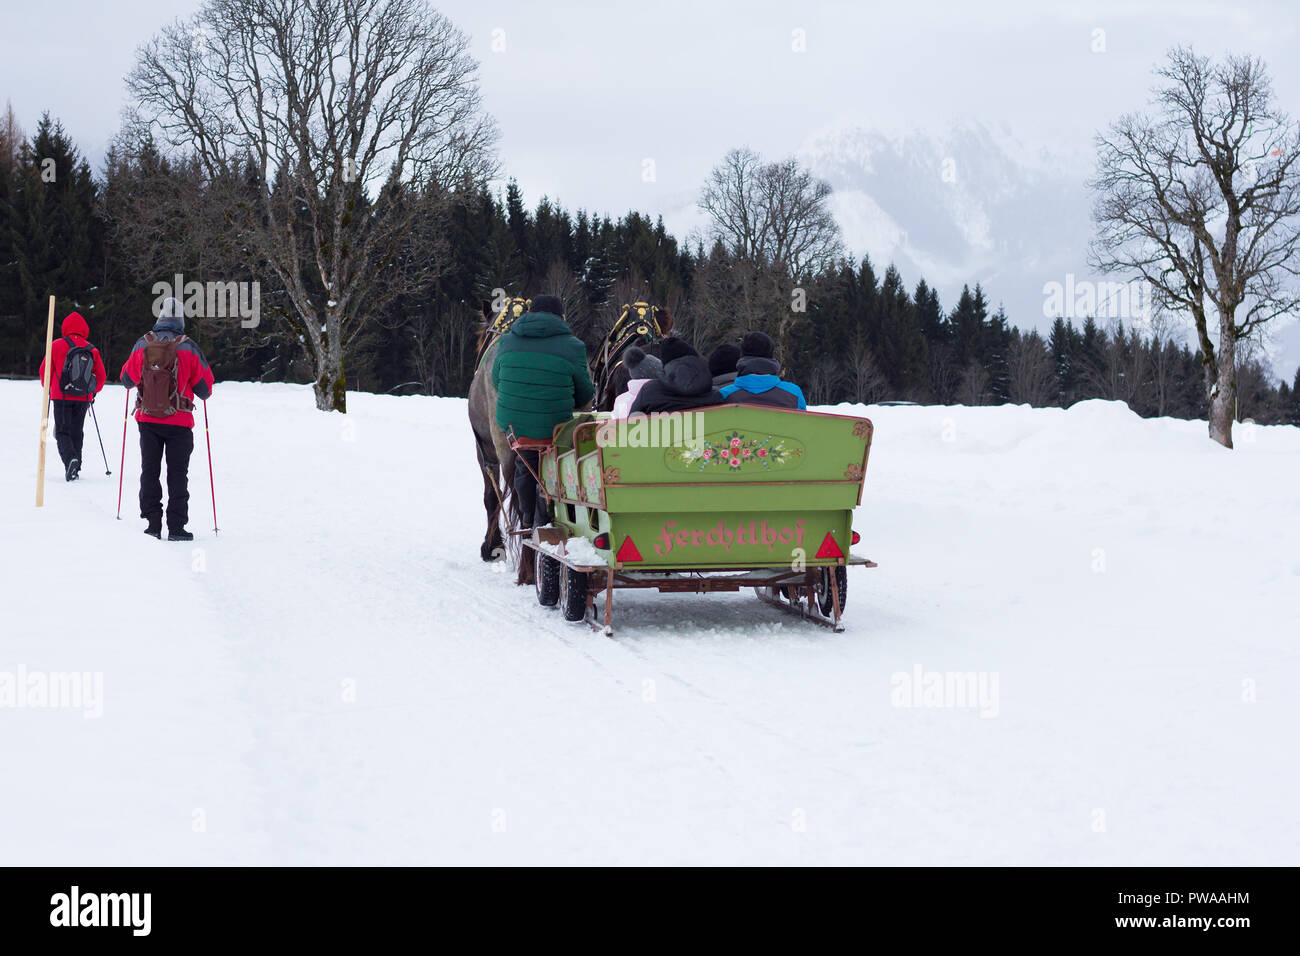 Ramsau am Dachstein AUSTRIA - JANUARY 2018: horses pulling sledge in snow winter countryside on January 2018 in in Ramsau, Austria Stock Photo